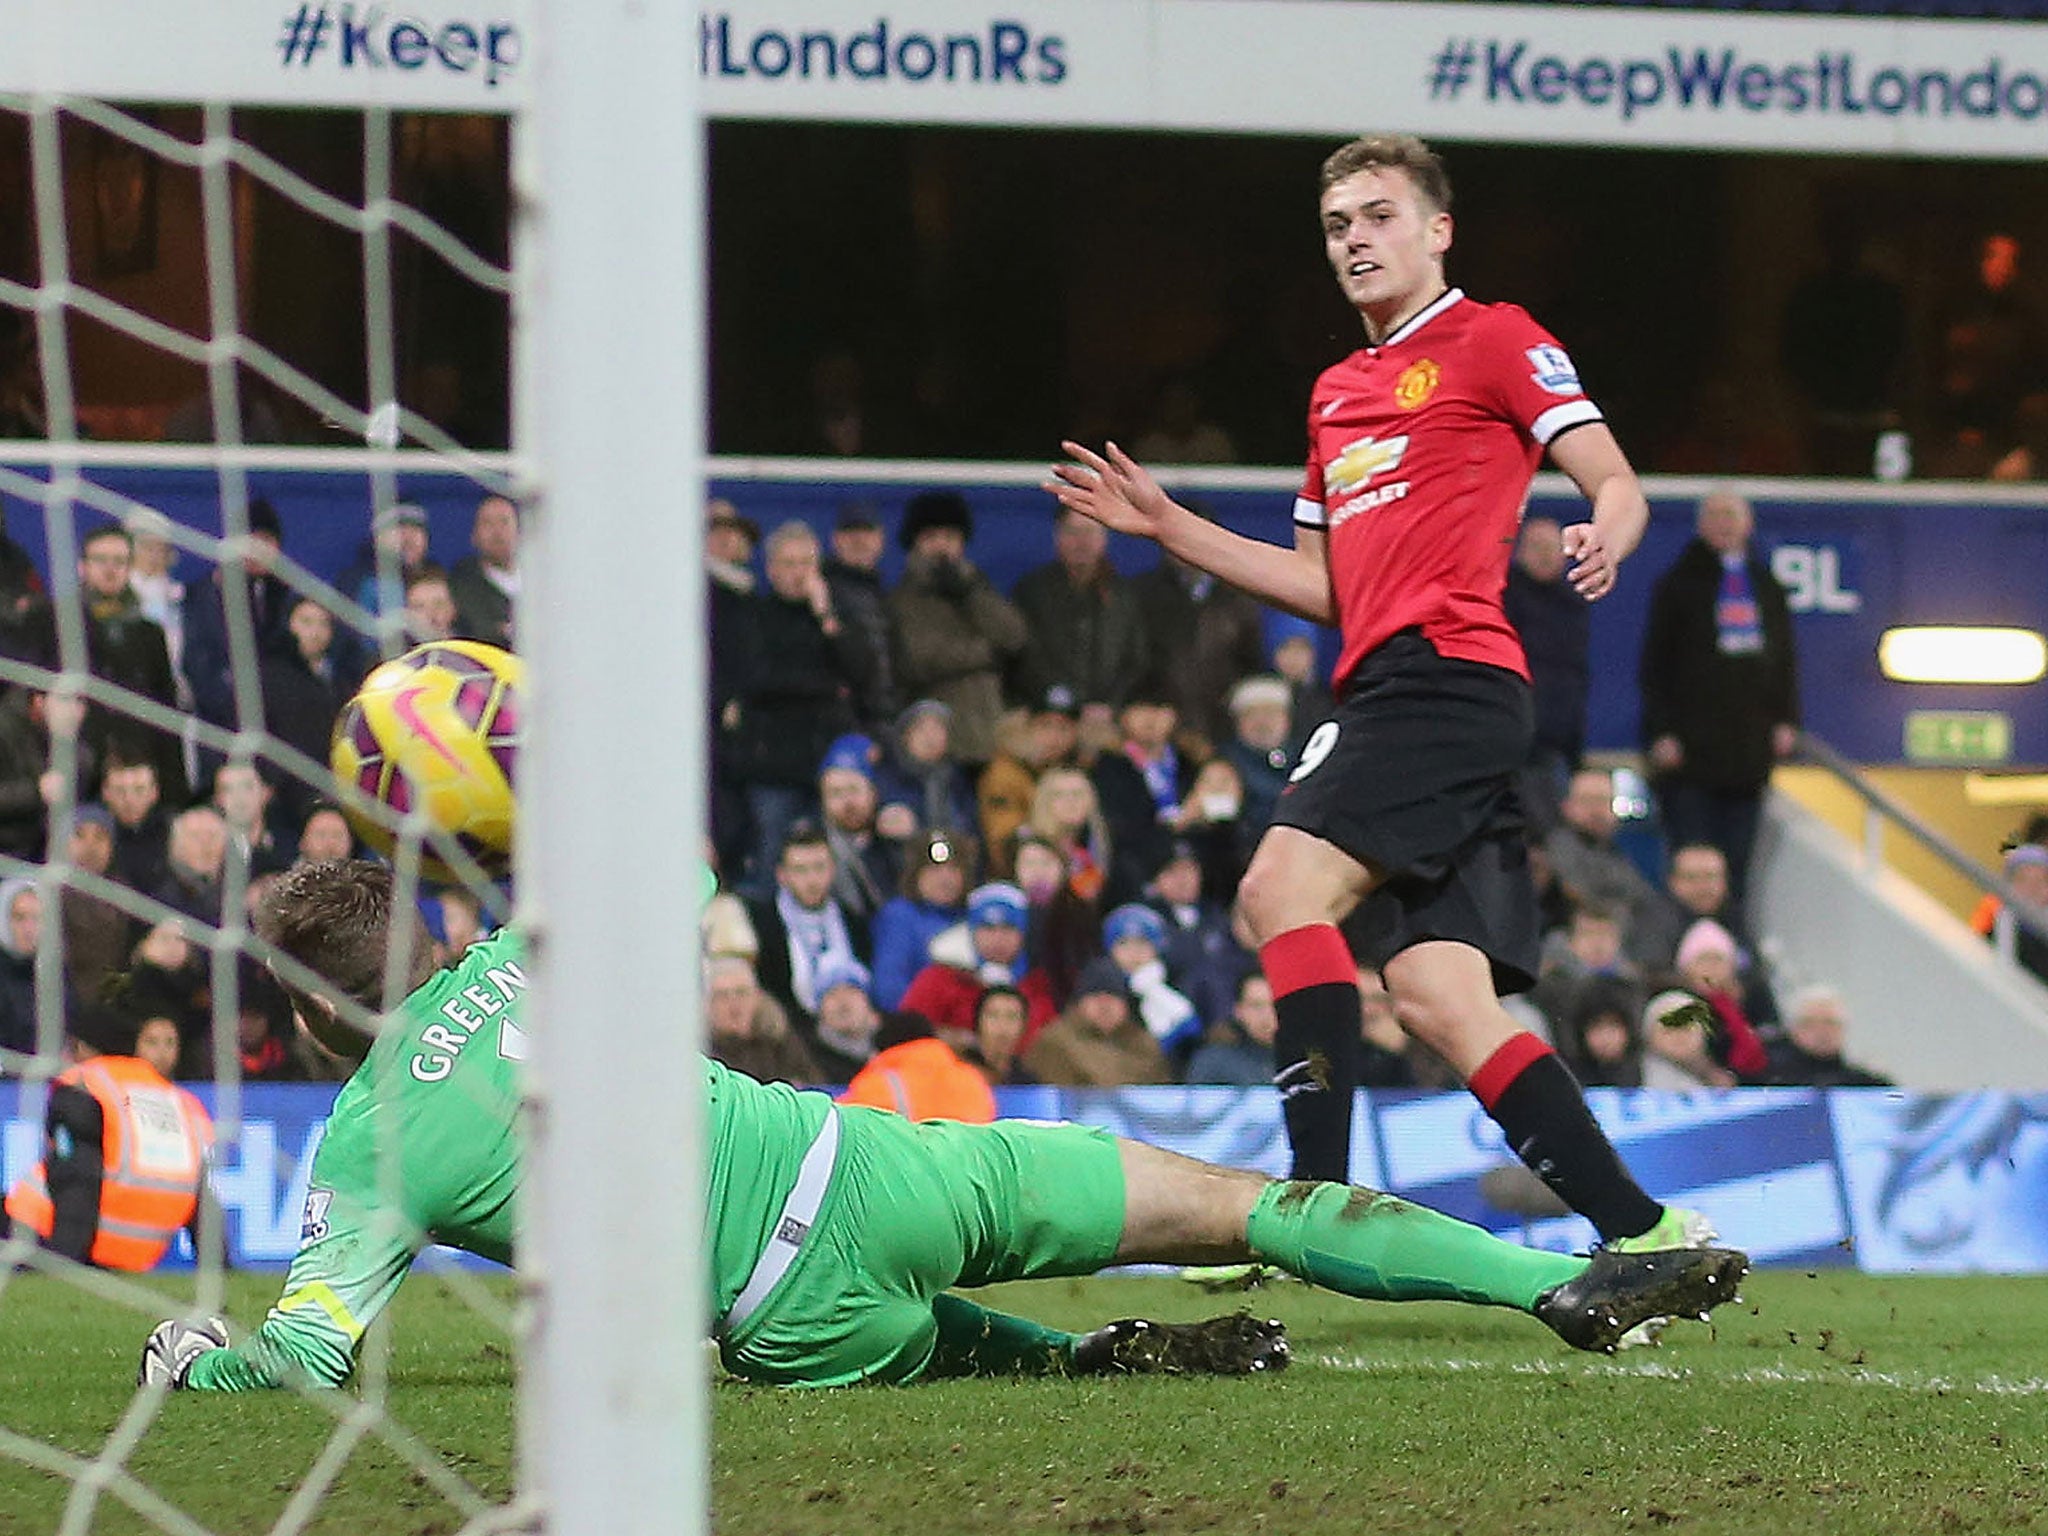 James Wilson scored United's second to seal the win